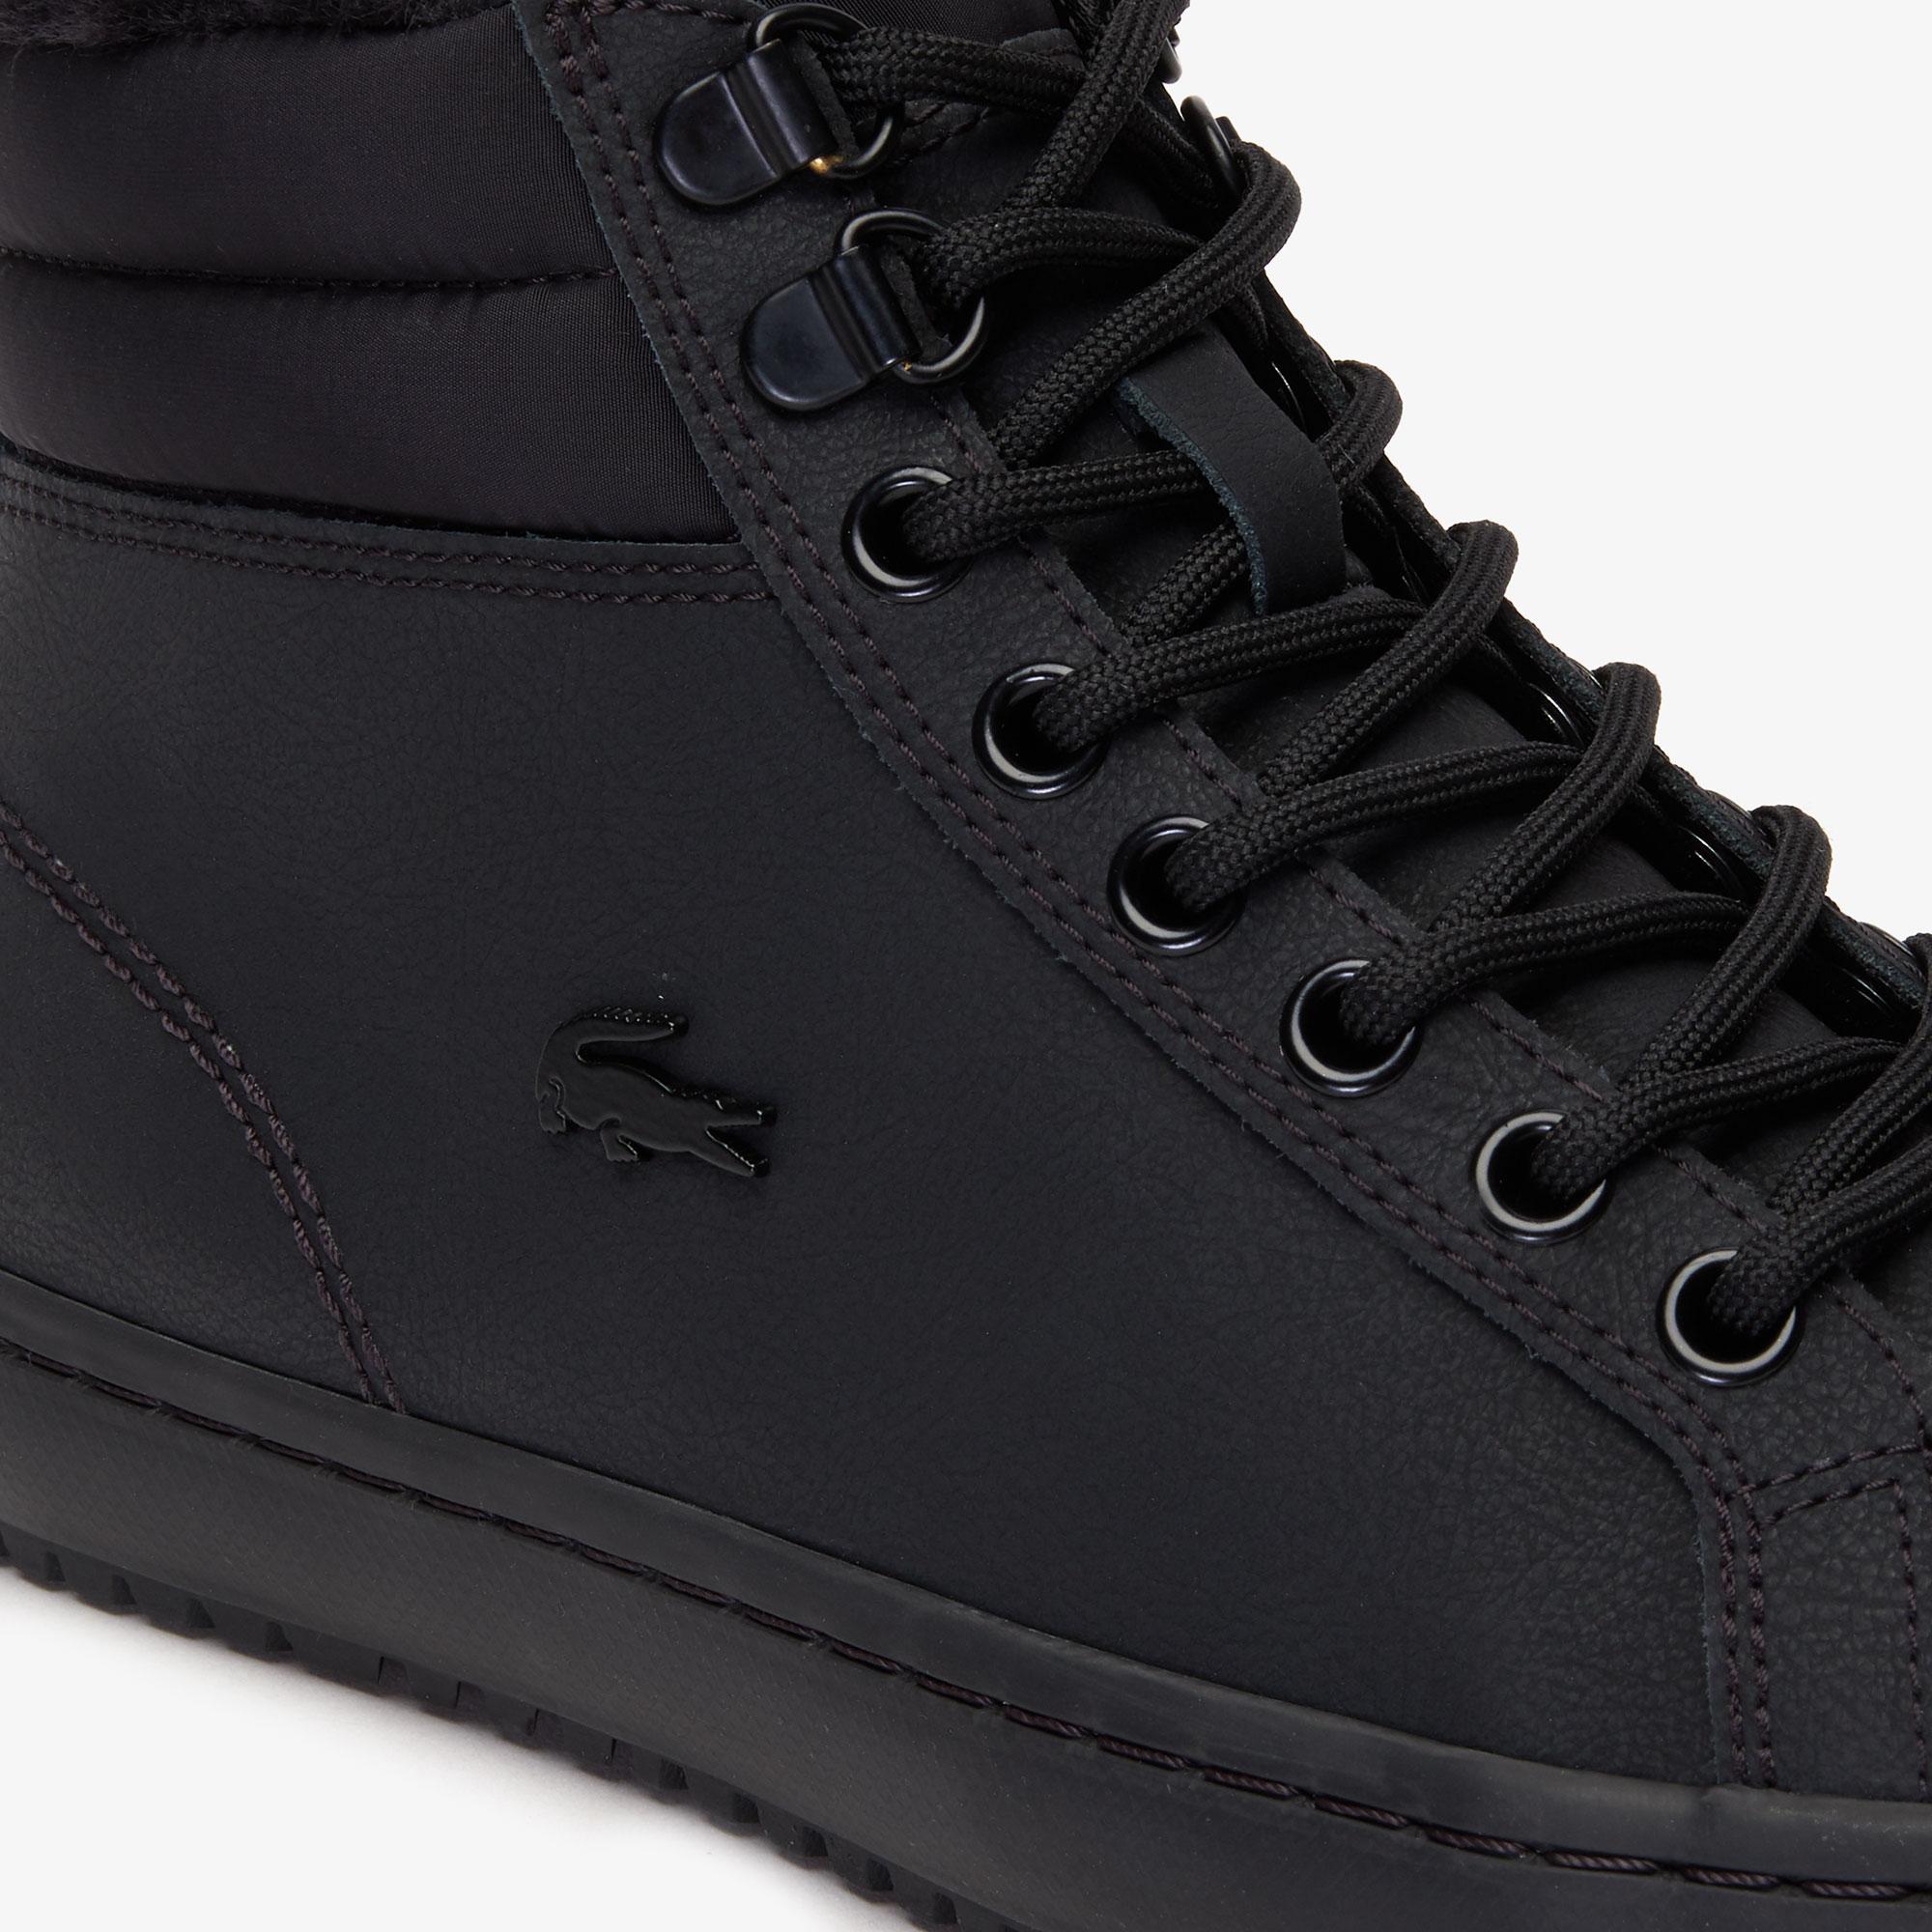 Lacoste Straightset Thermo 4191 Boots 